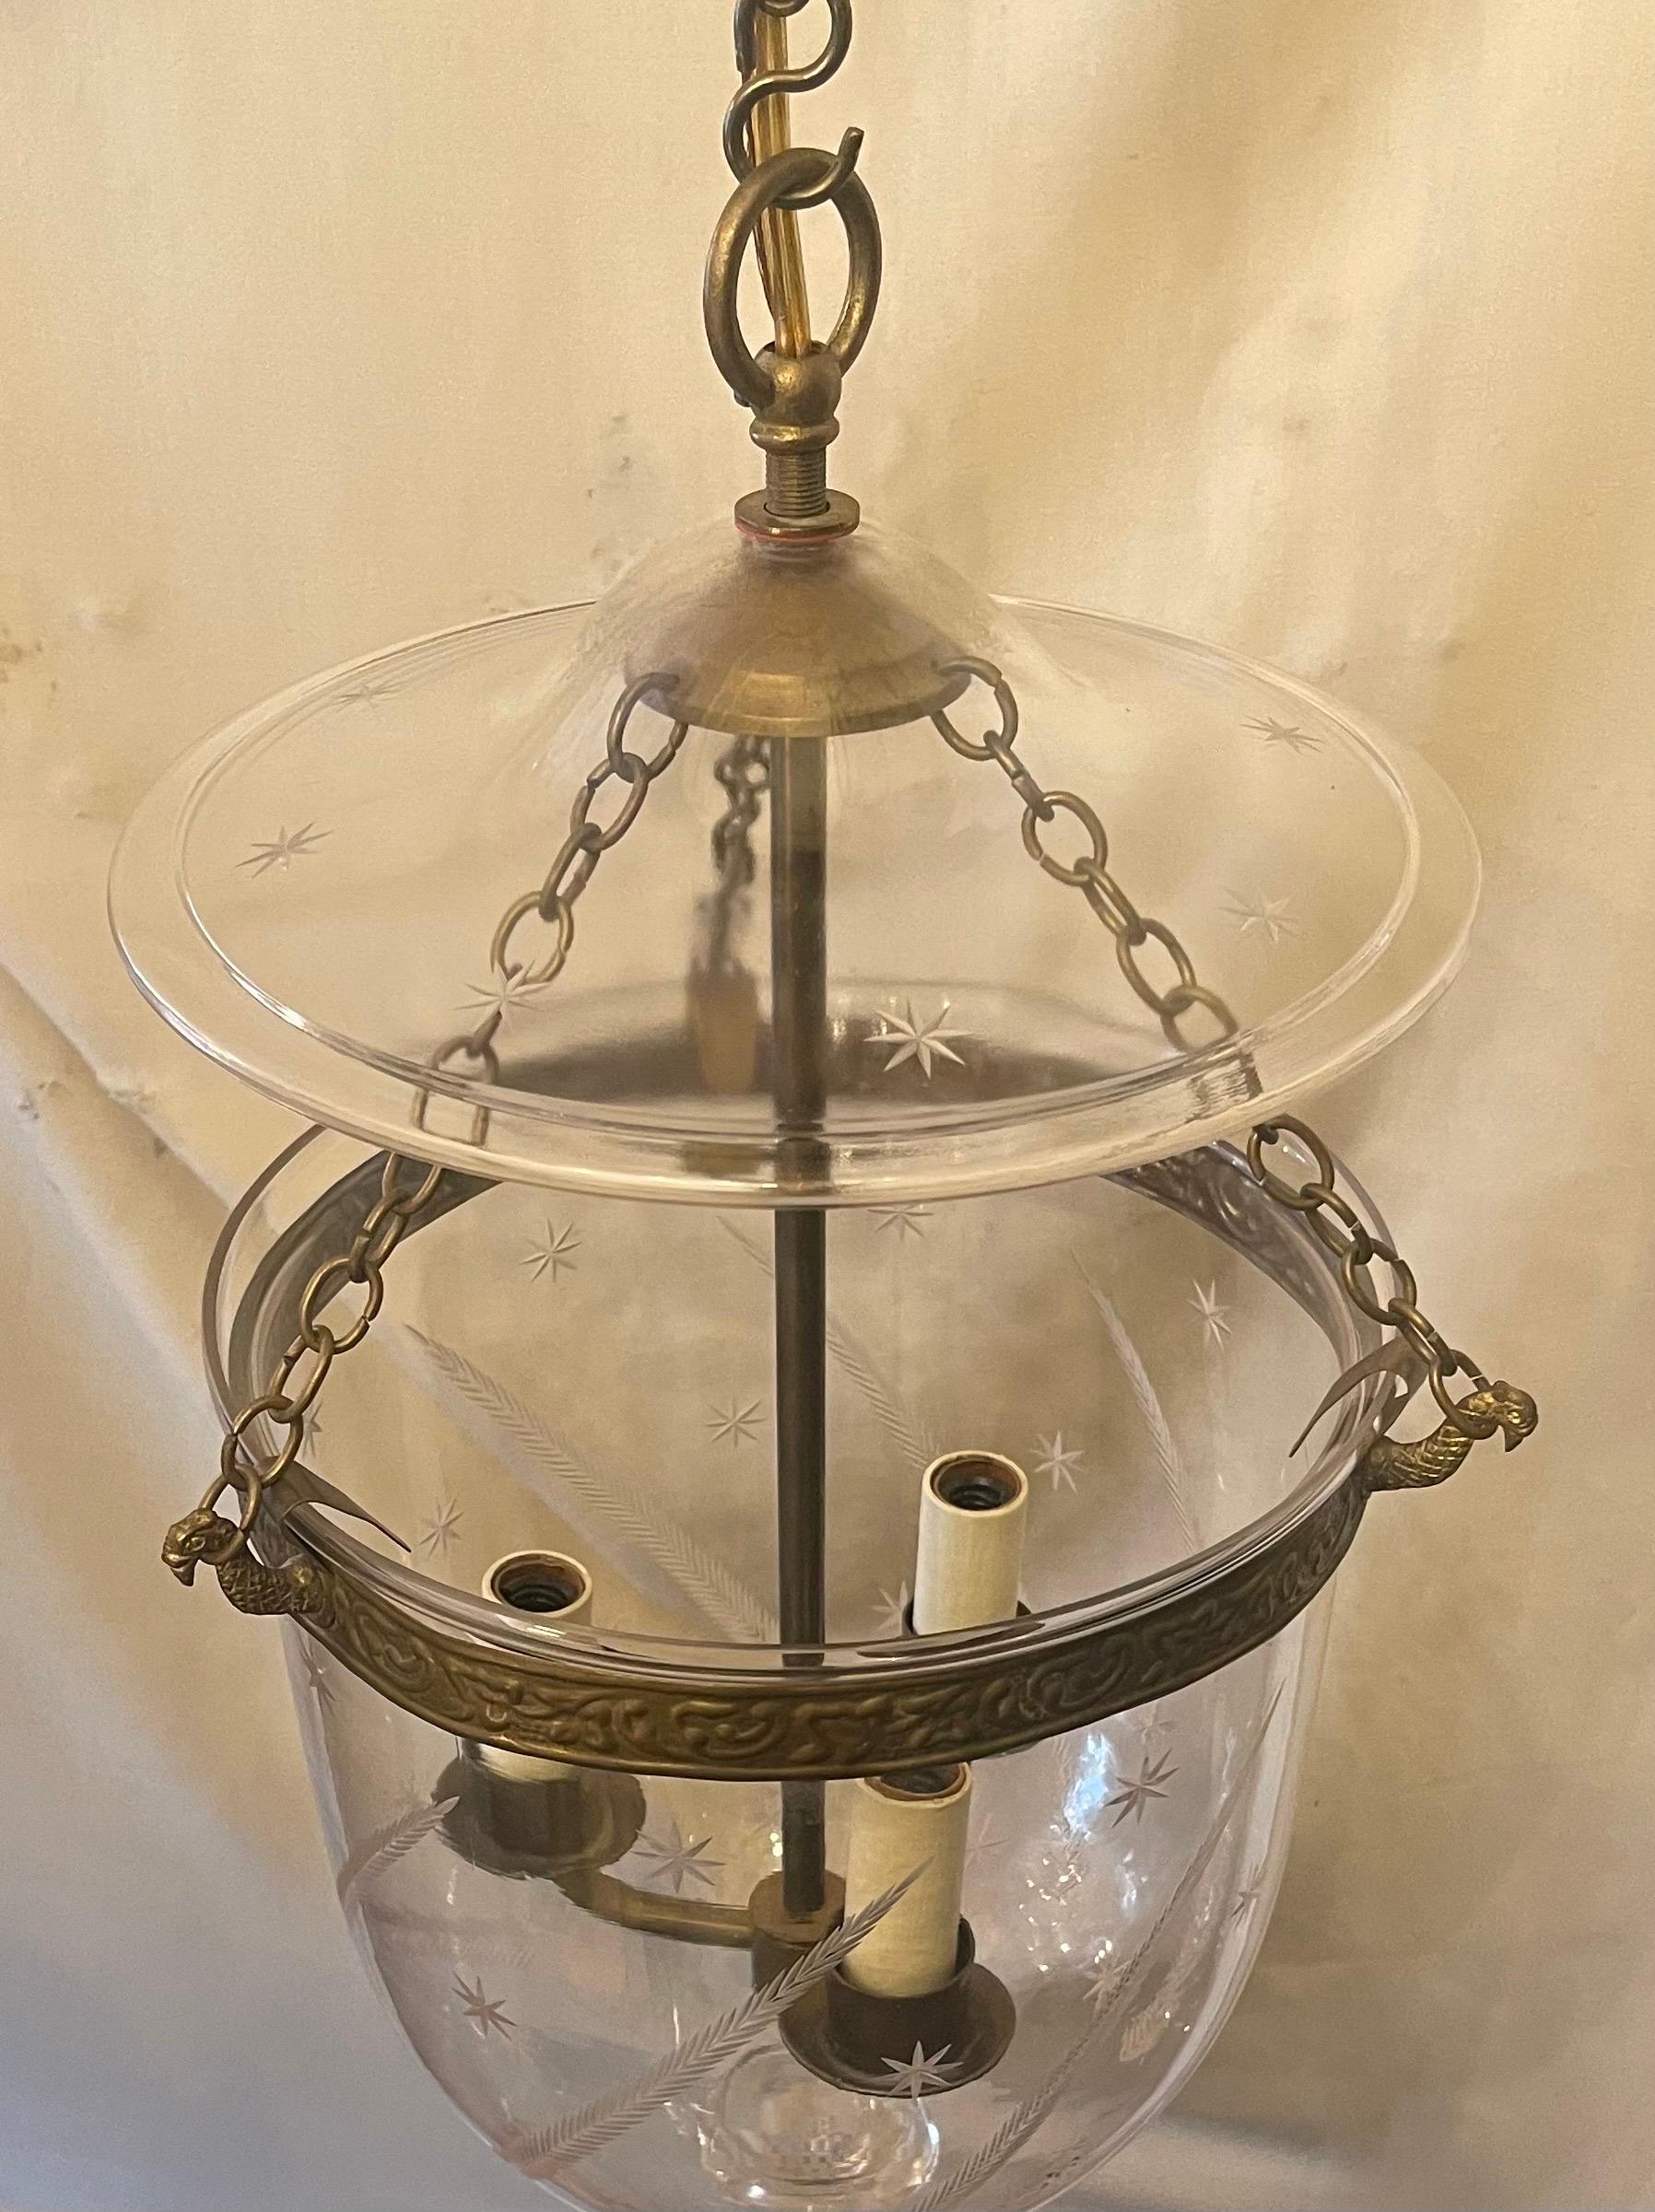 A Fine Regency Style Vaughan Designs English Brass / Bronze Blown Glass Bell Jar Lanterns With Stars And Feathers Etched In The Bell And Stars On The Glass Top Plate, Fitted With 3 Candelabra Lights.
Vaughan Designs Item # Code: CL0308.BR

